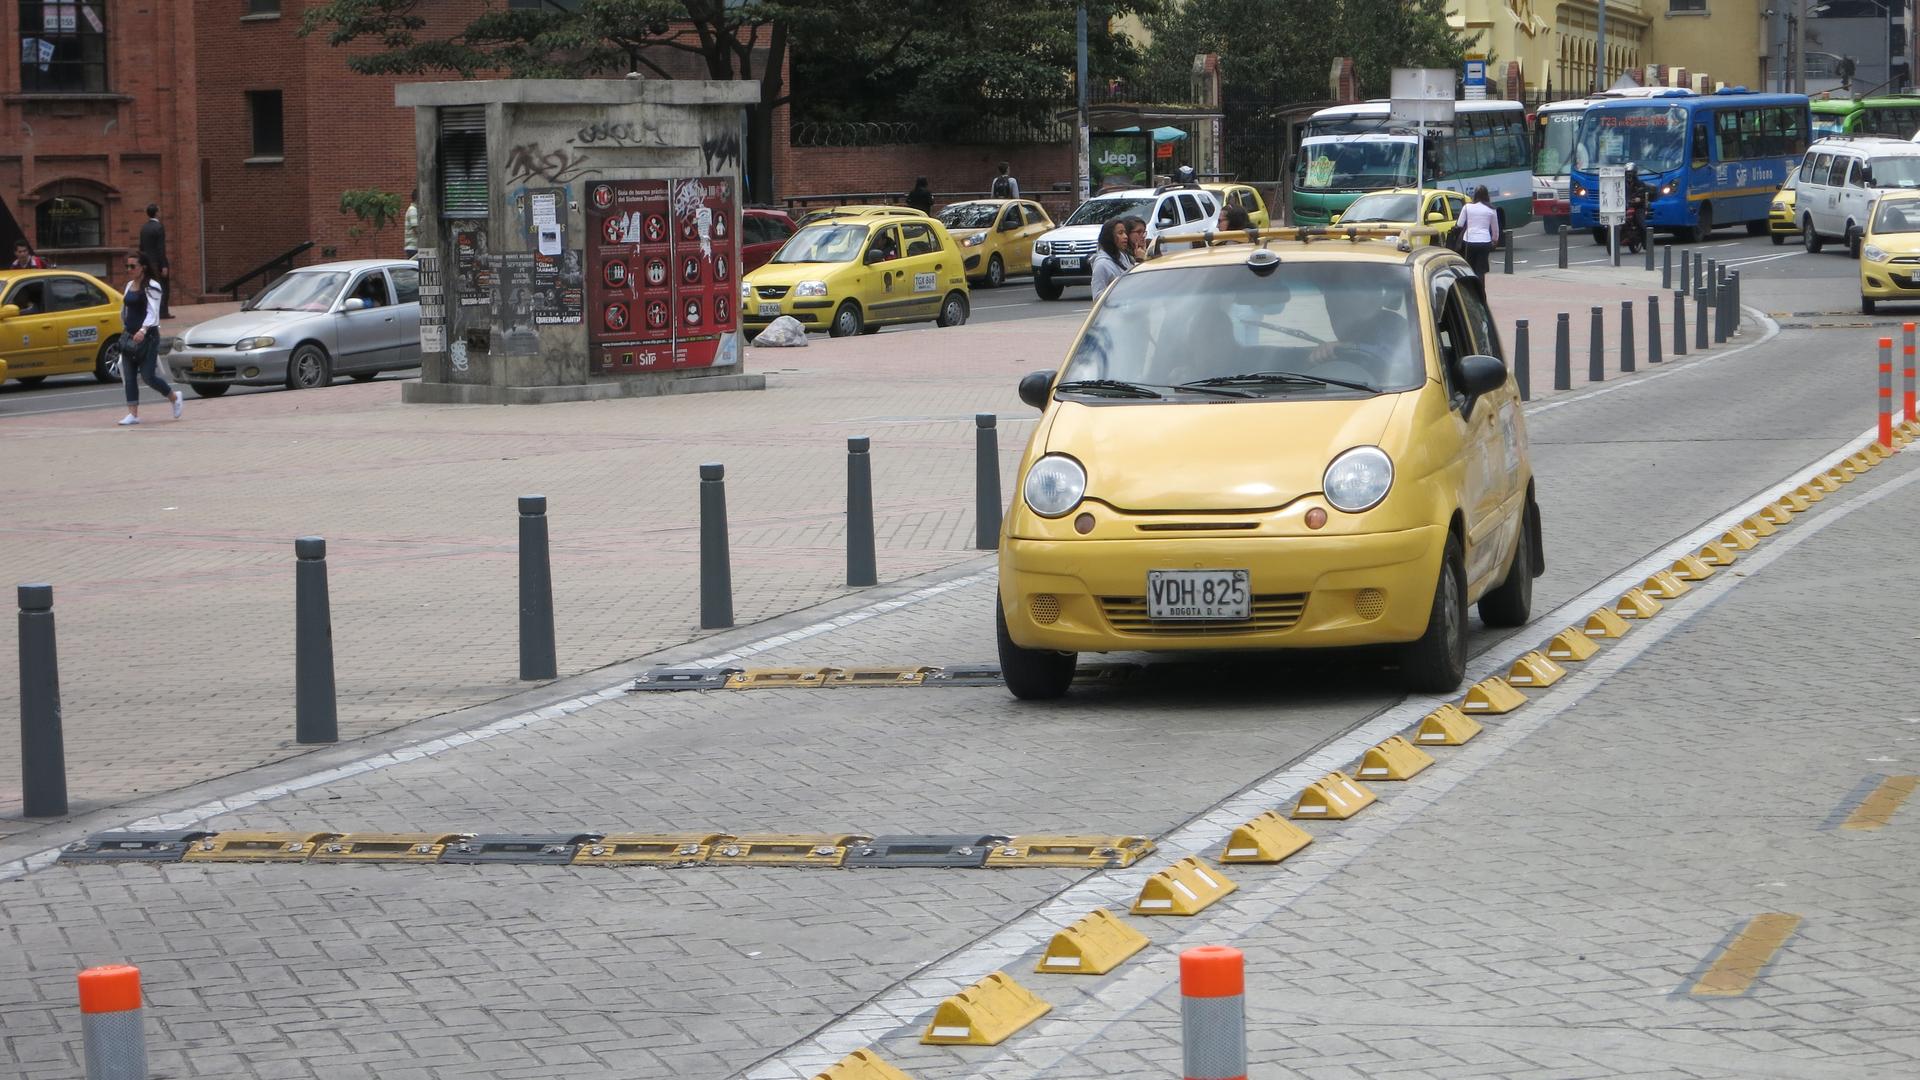 Bogotá has taken a number of design steps to slow cars down and keep them separate from pedestrians and cyclists.